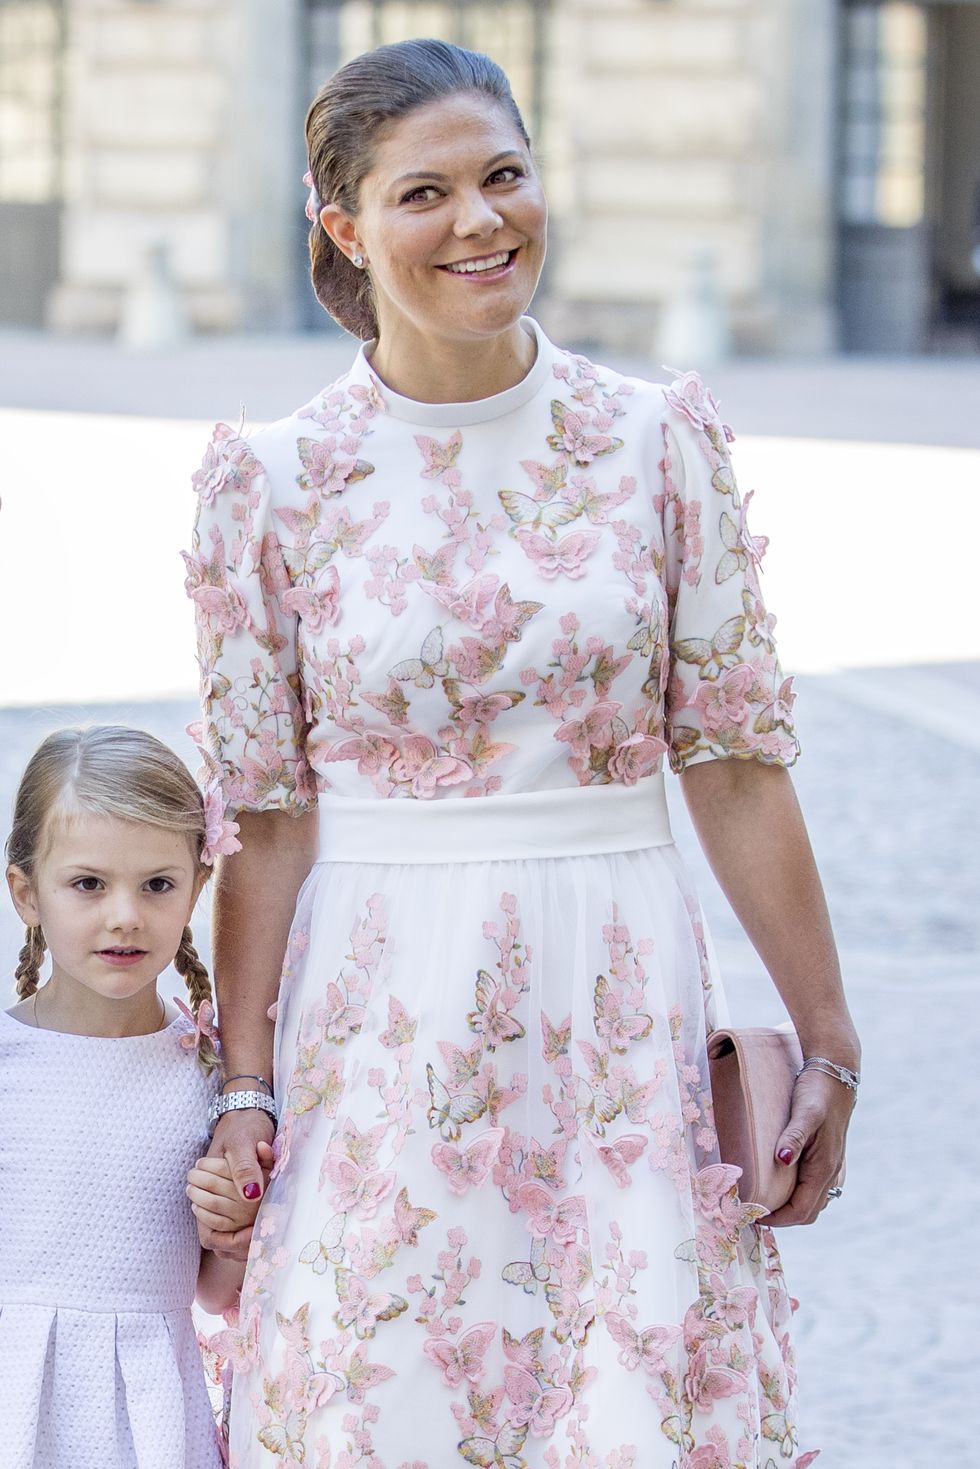 crown princess victoria of sweden 40th birthday celebrations in stockholm